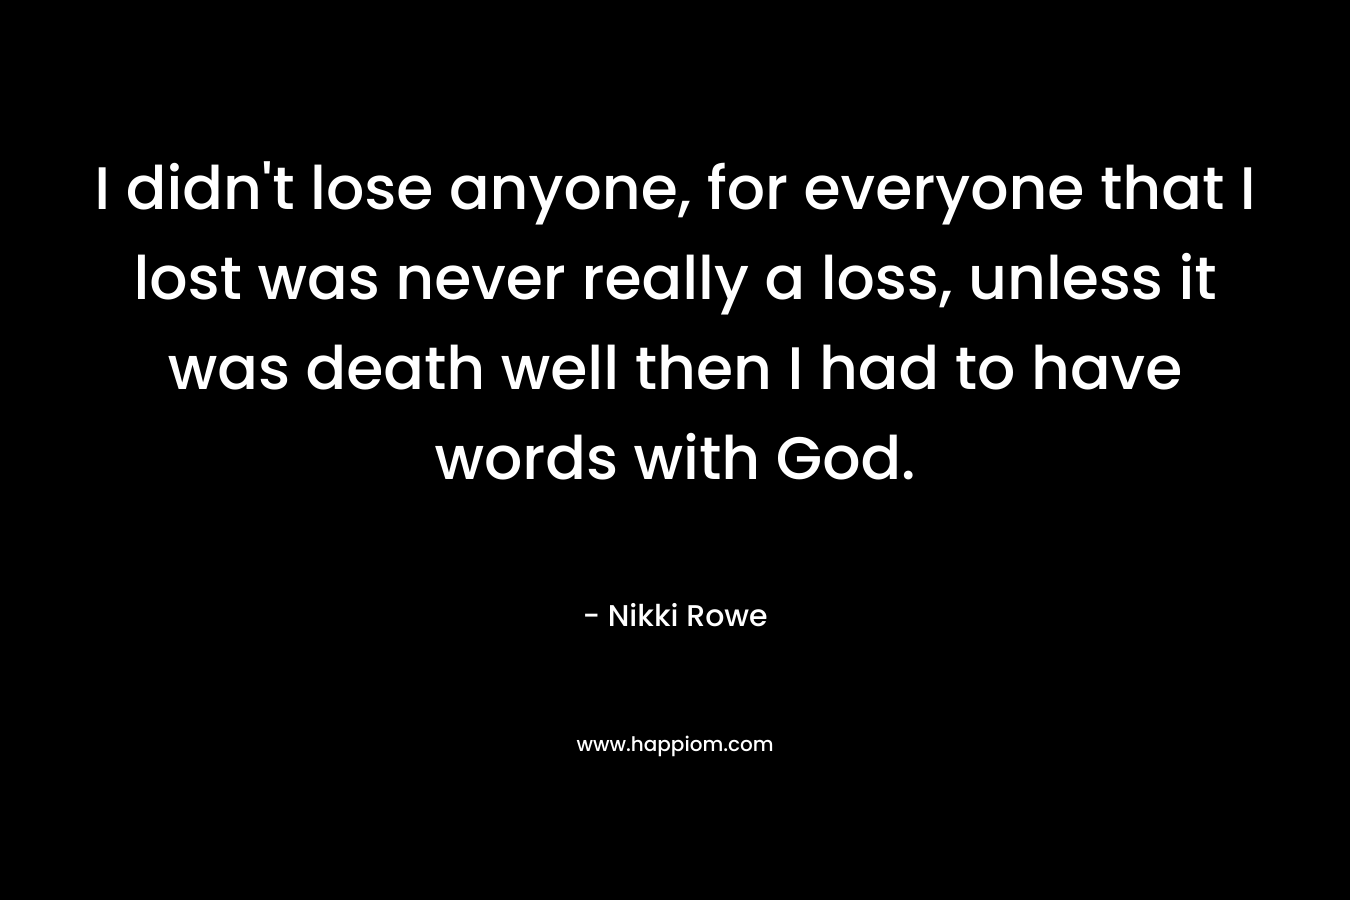 I didn't lose anyone, for everyone that I lost was never really a loss, unless it was death well then I had to have words with God.